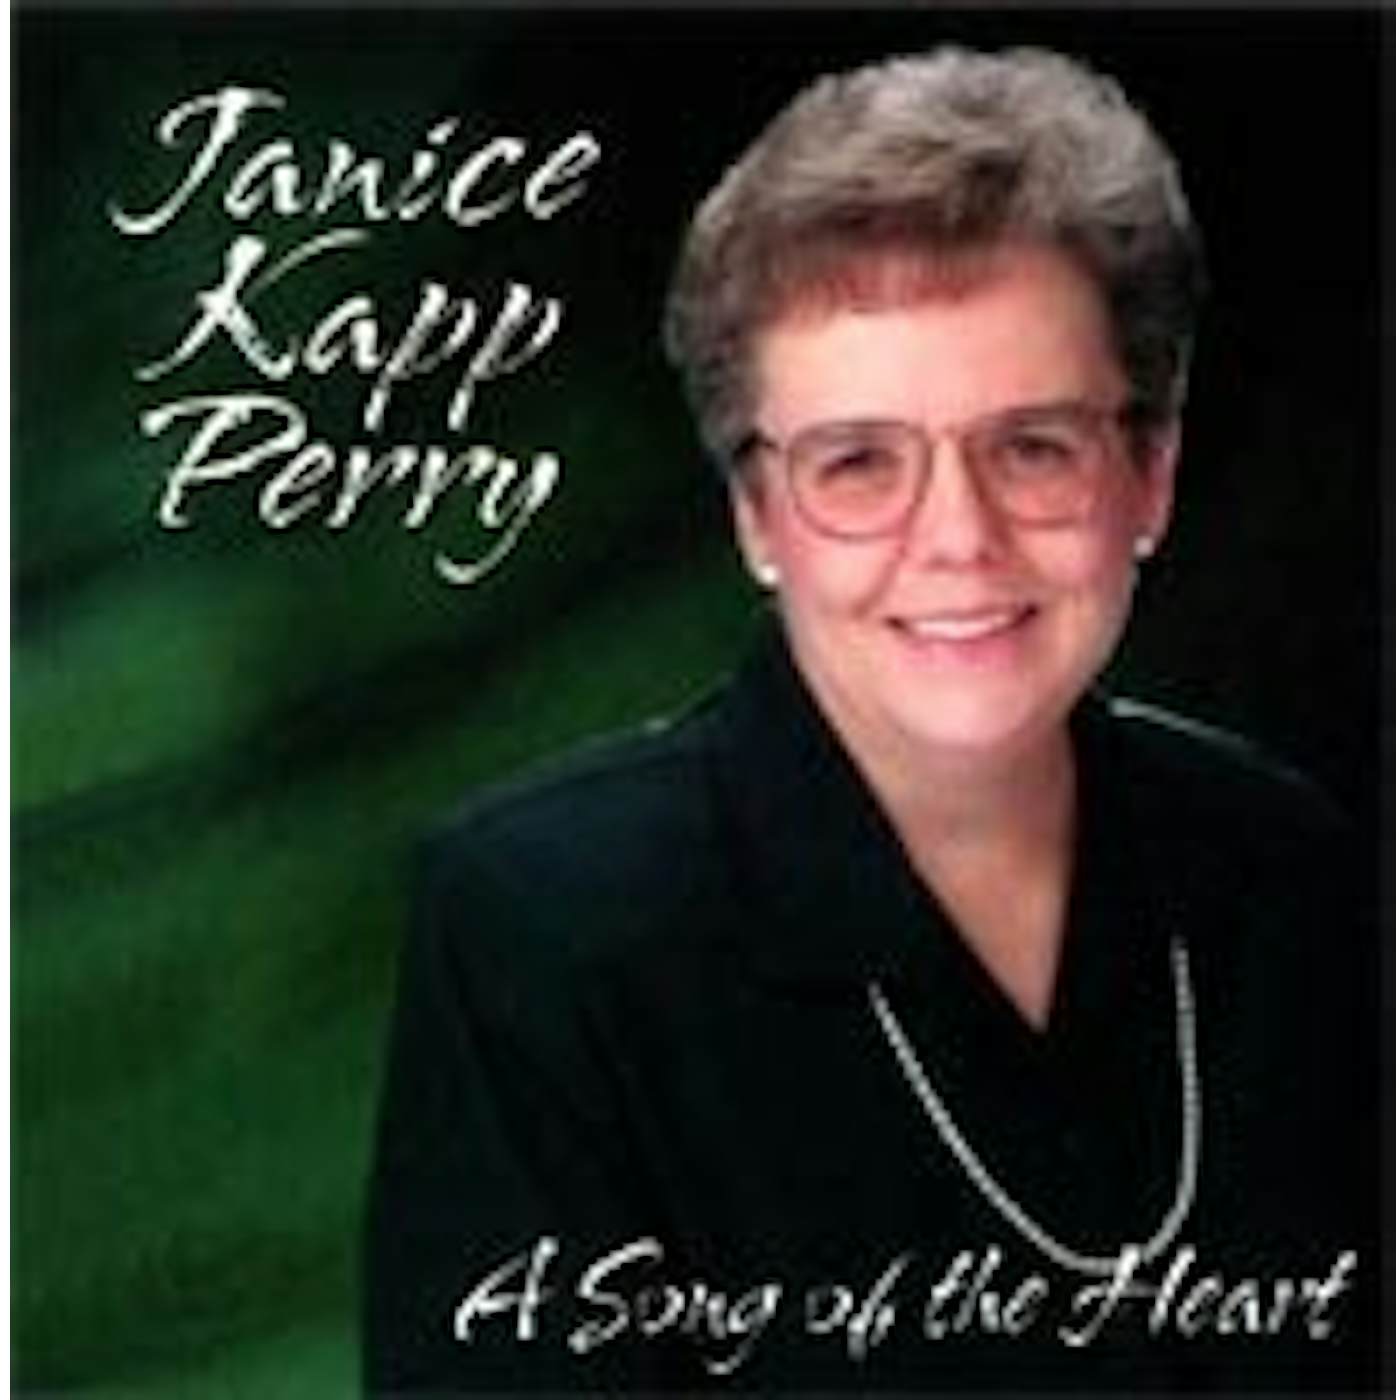 Janice Kapp Perry SONG OF THE HEART CD